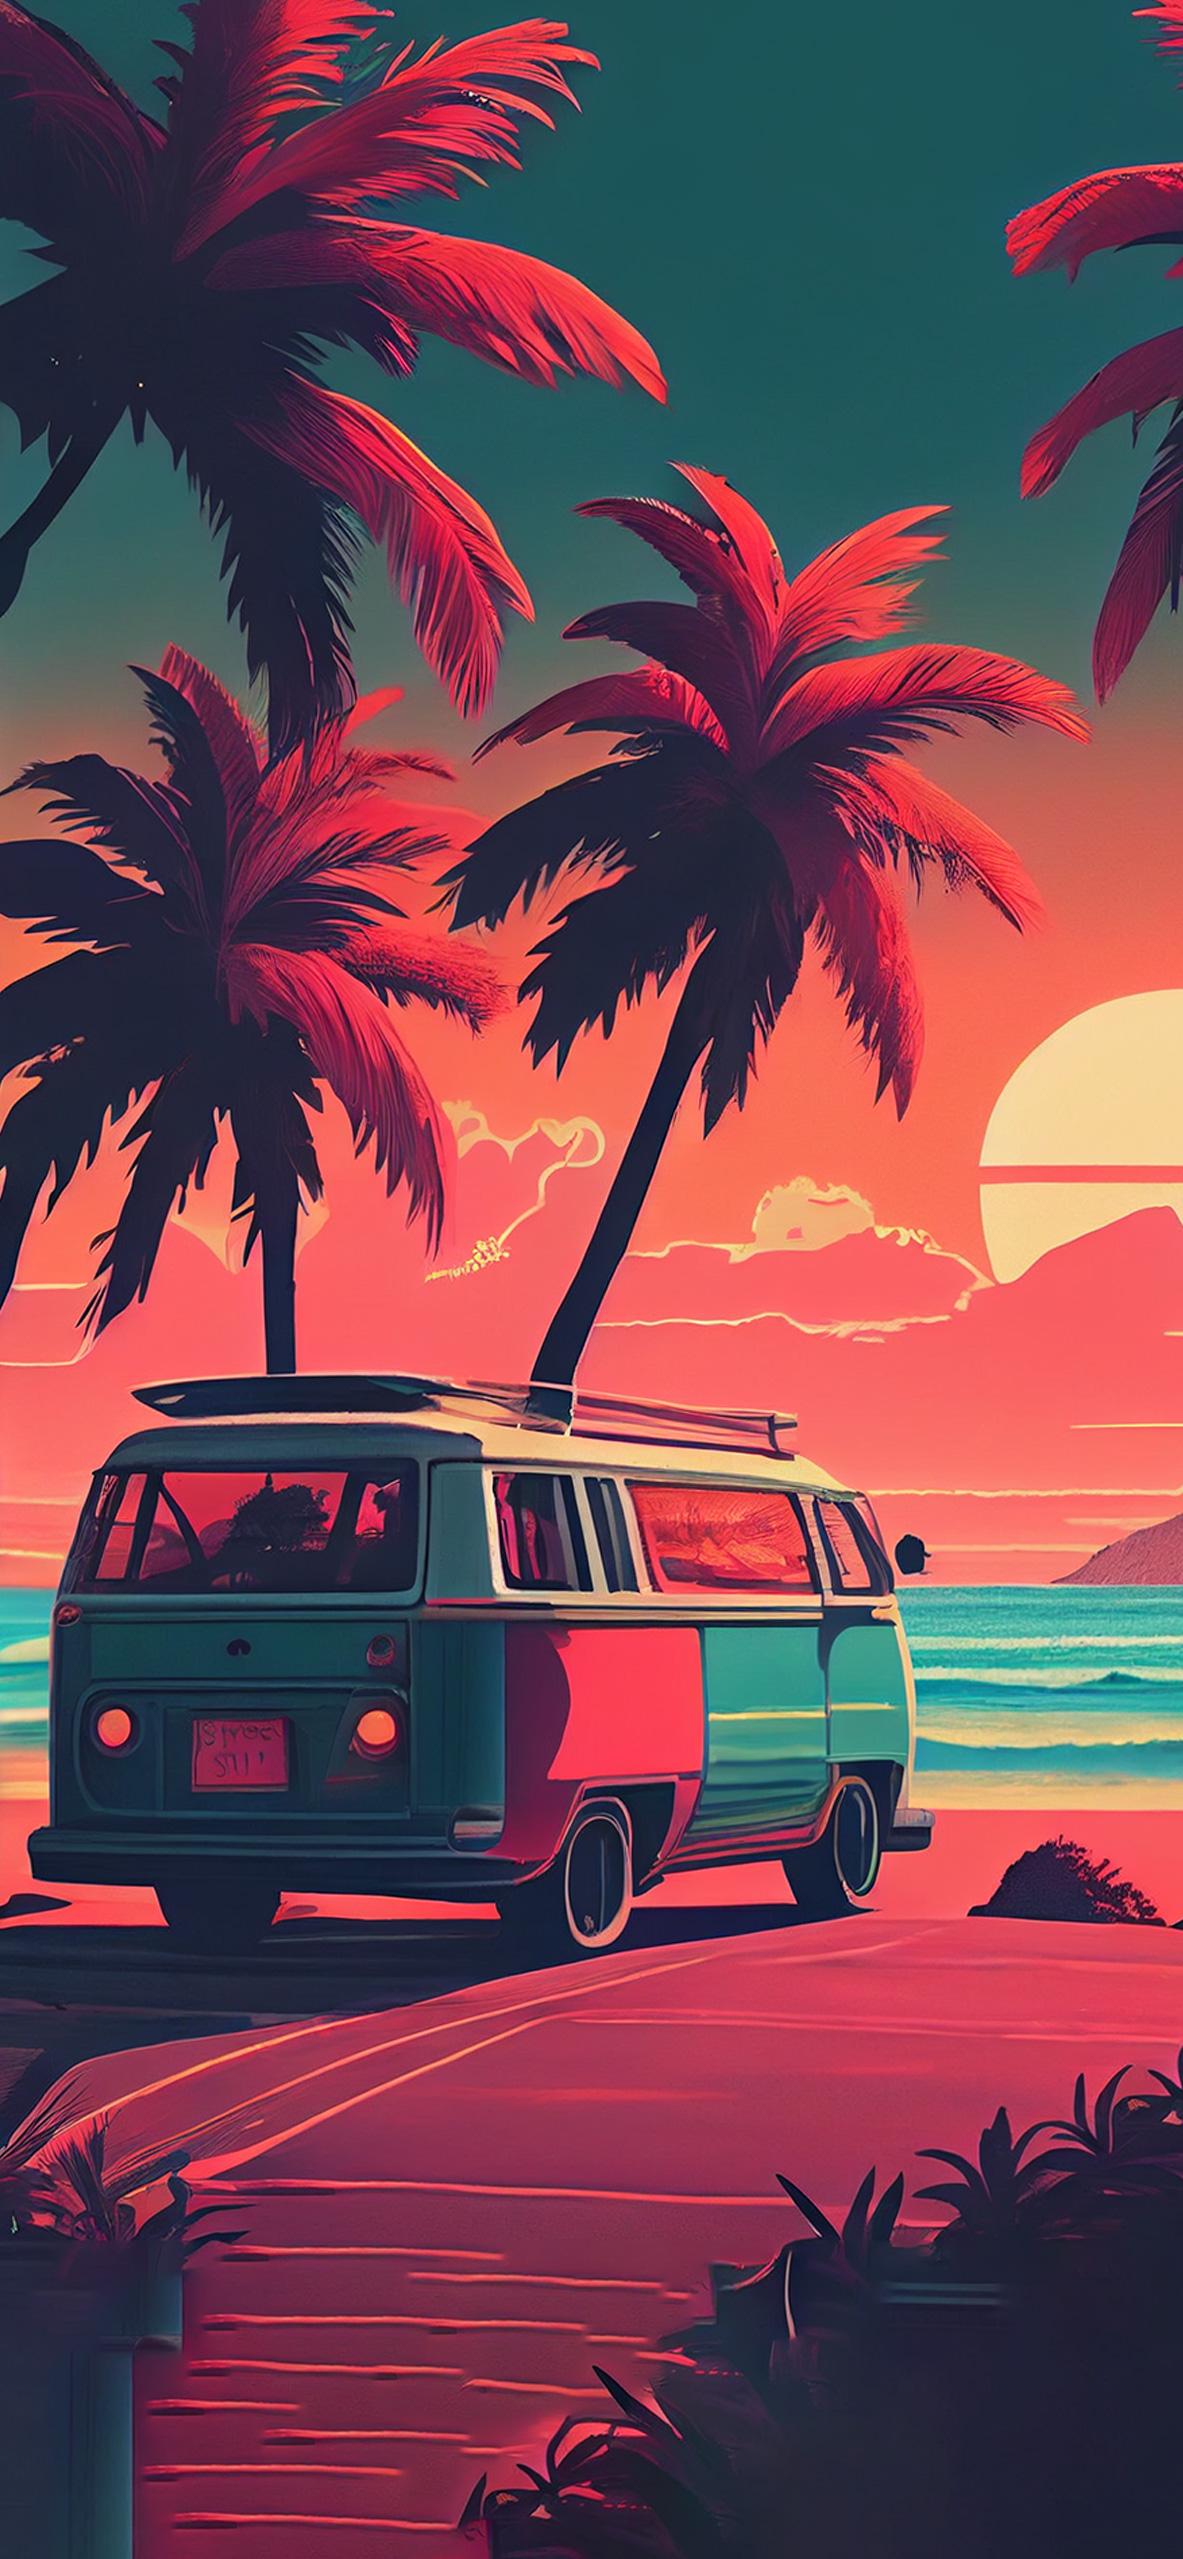 Microbus on the Beach Aesthetic Wallpaper   Summer Wallpapers